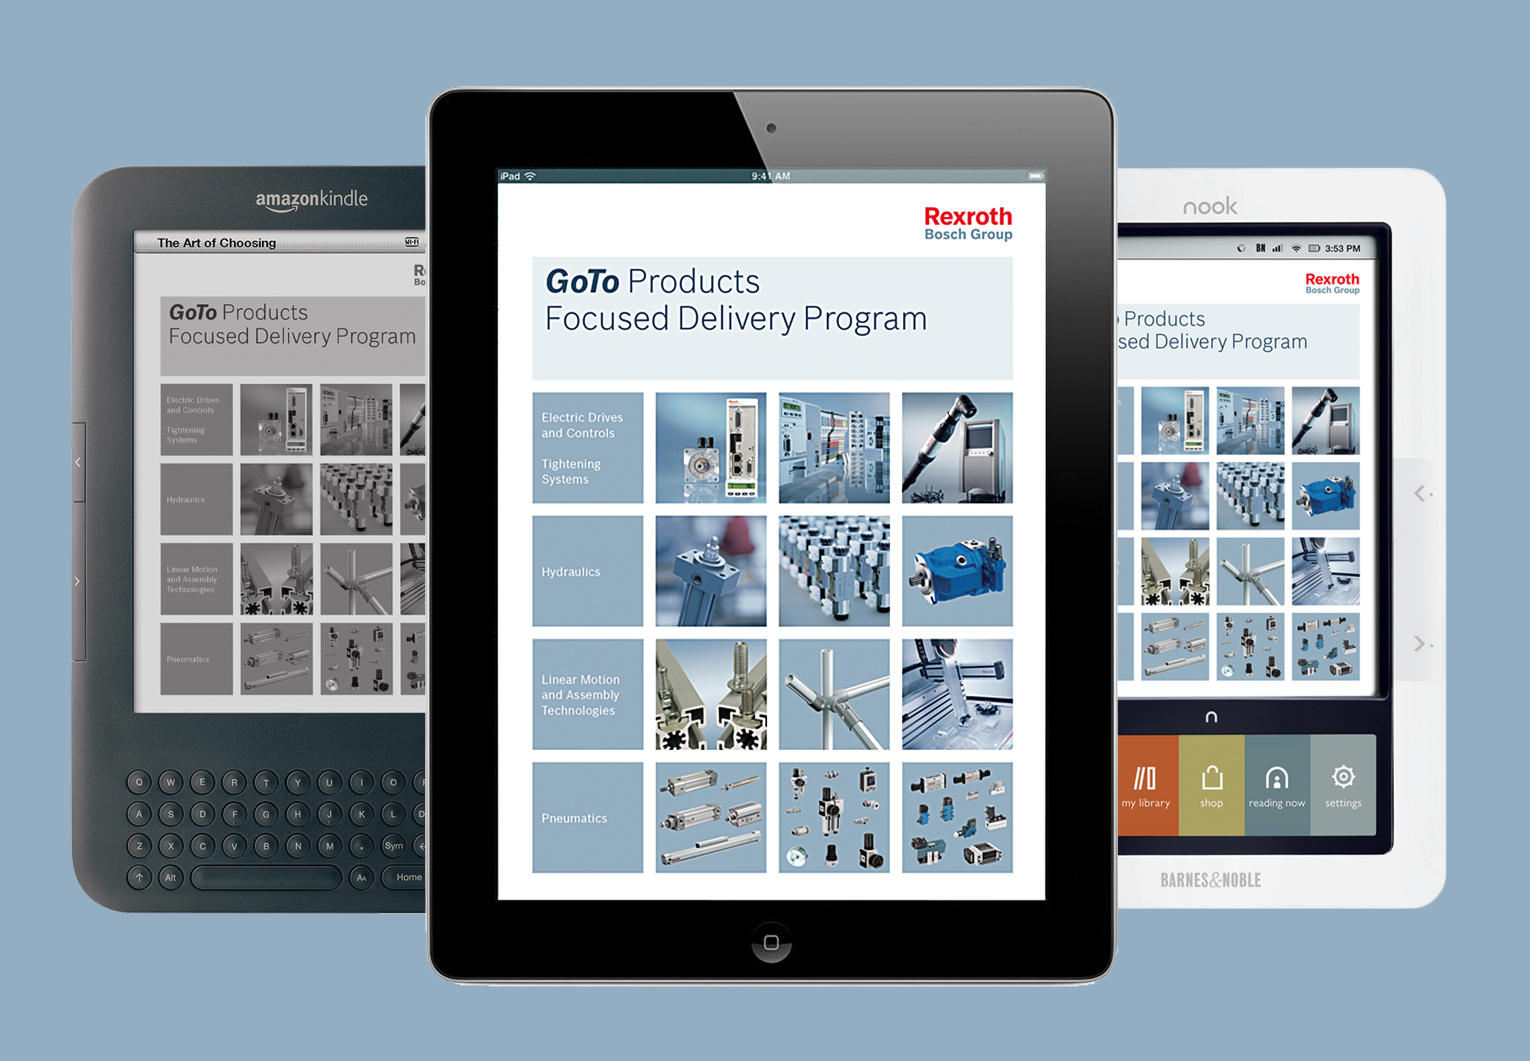 Mobile users now have complete GoTo Focused Delivery catalogs in digital form for faster, easier ordering of products from Apple iPad™ and other e-reader platforms.